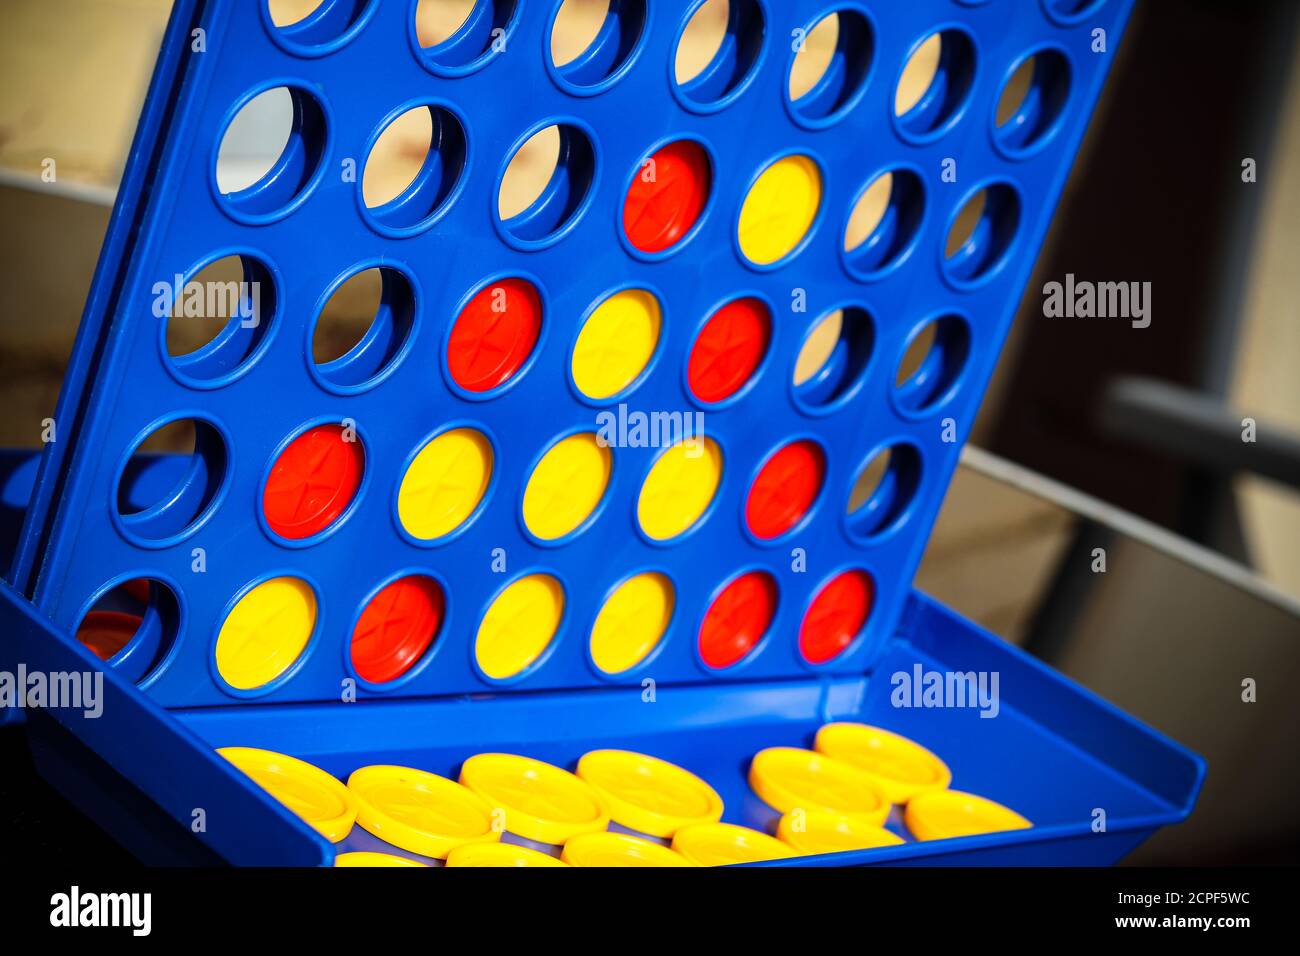 Puzzle game with red and yellow counters Stock Photo